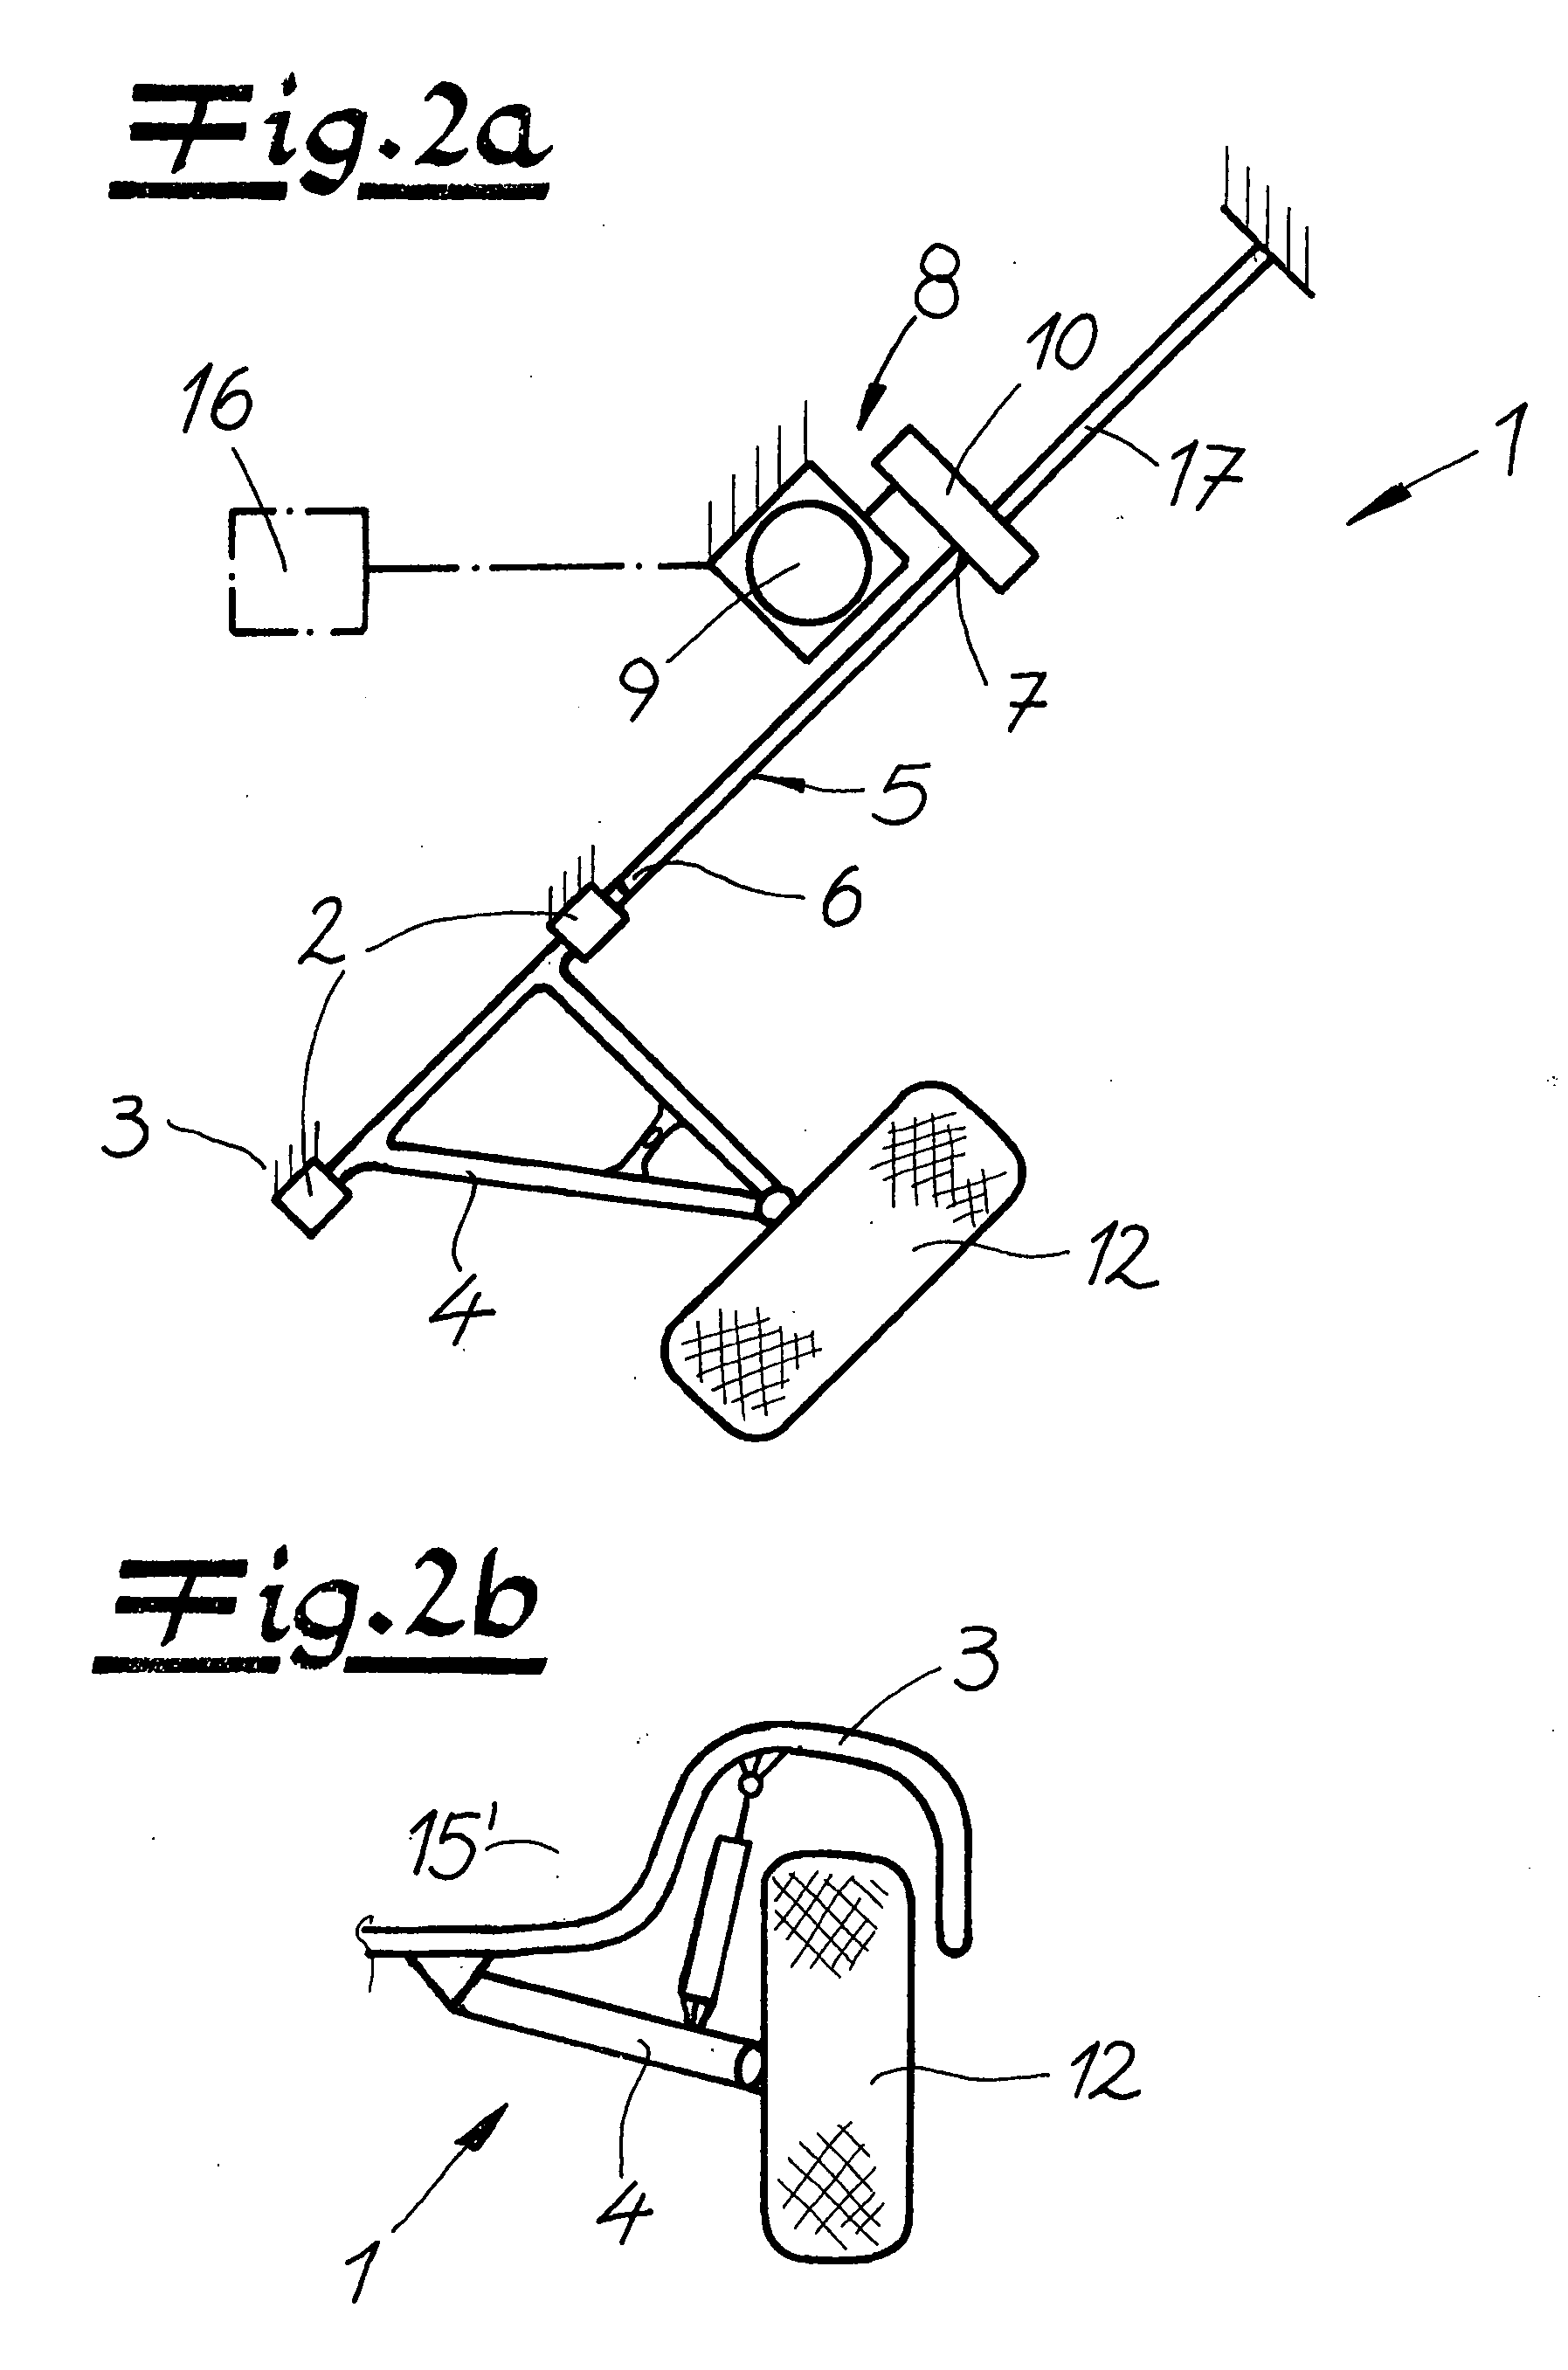 Wheel suspennsion for a motor vehicle